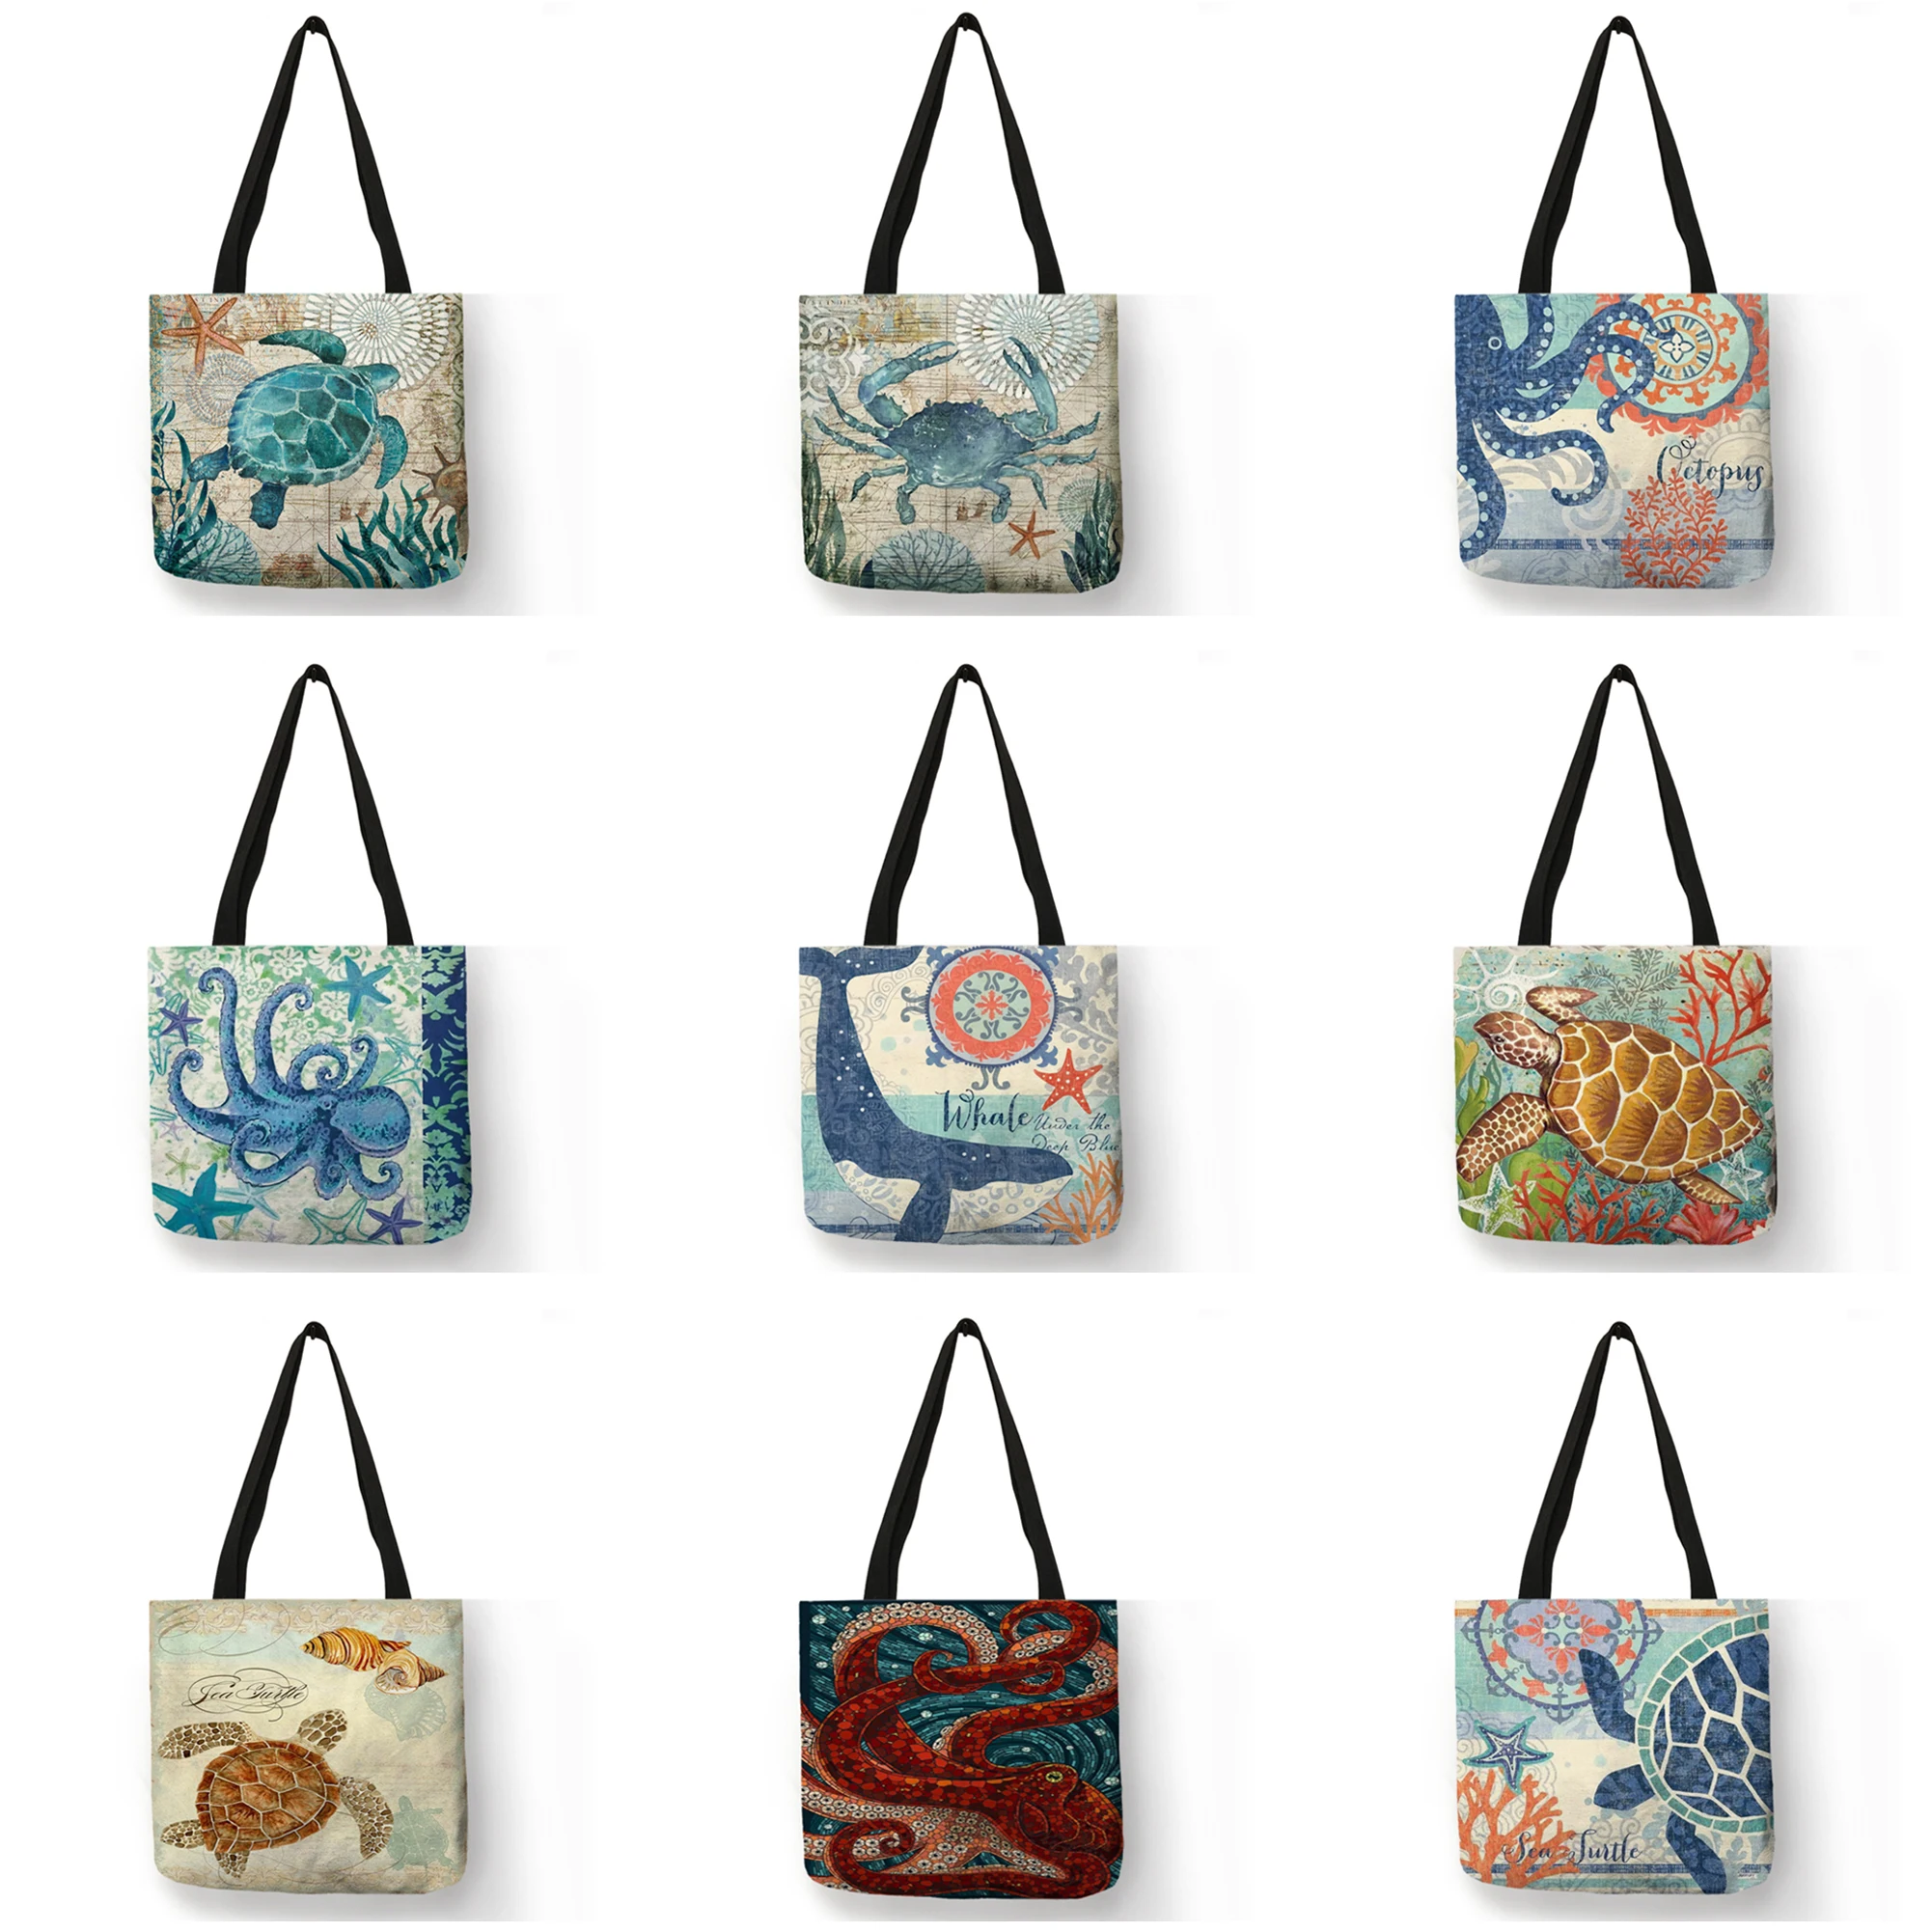 Sansibar Tote turquoise themed print casual look Bags Totes 